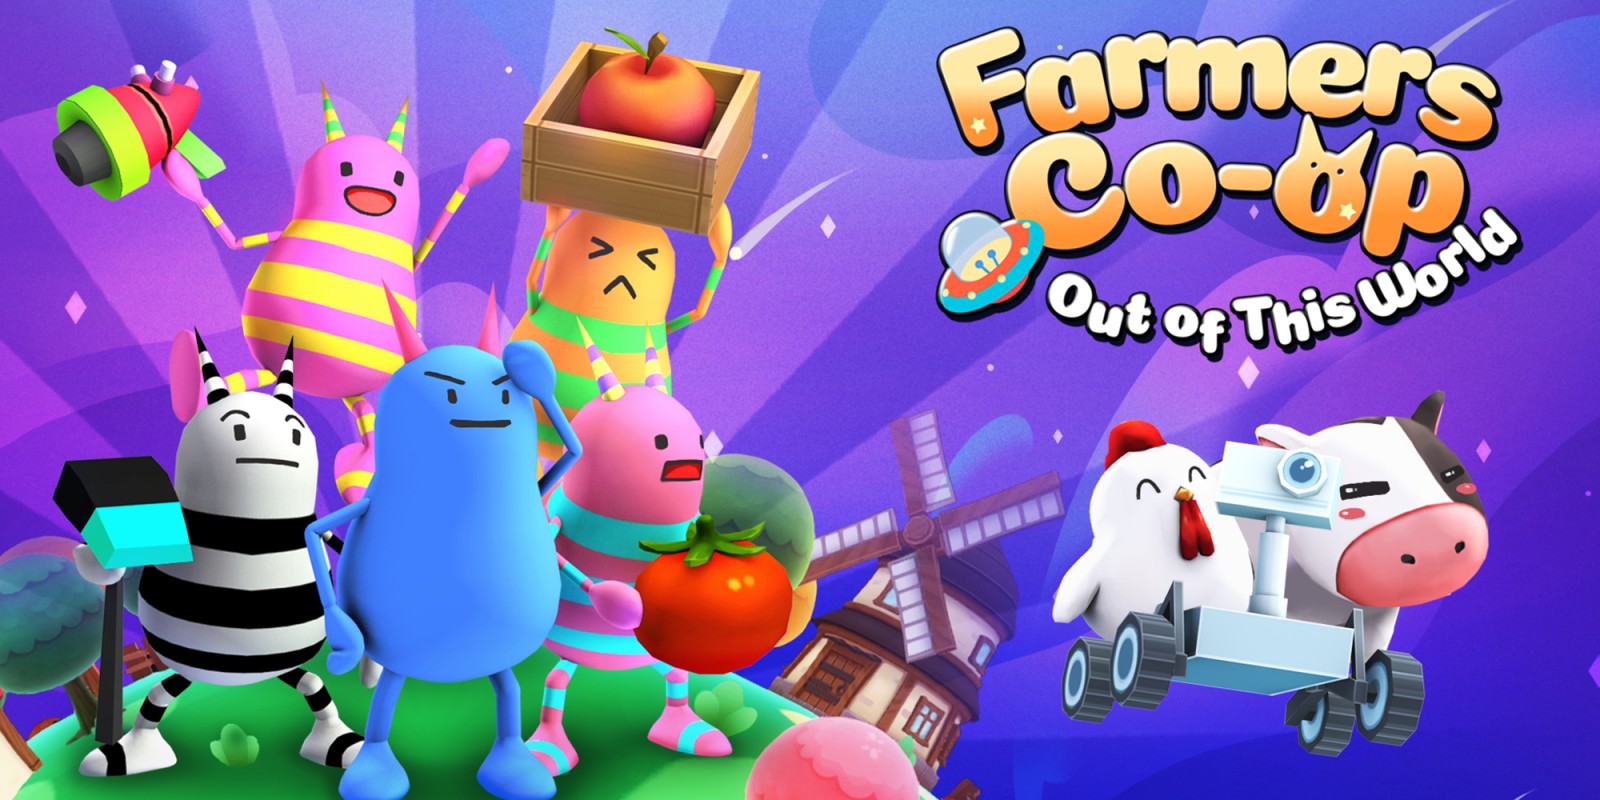 Farmers Co-op: Out of This World